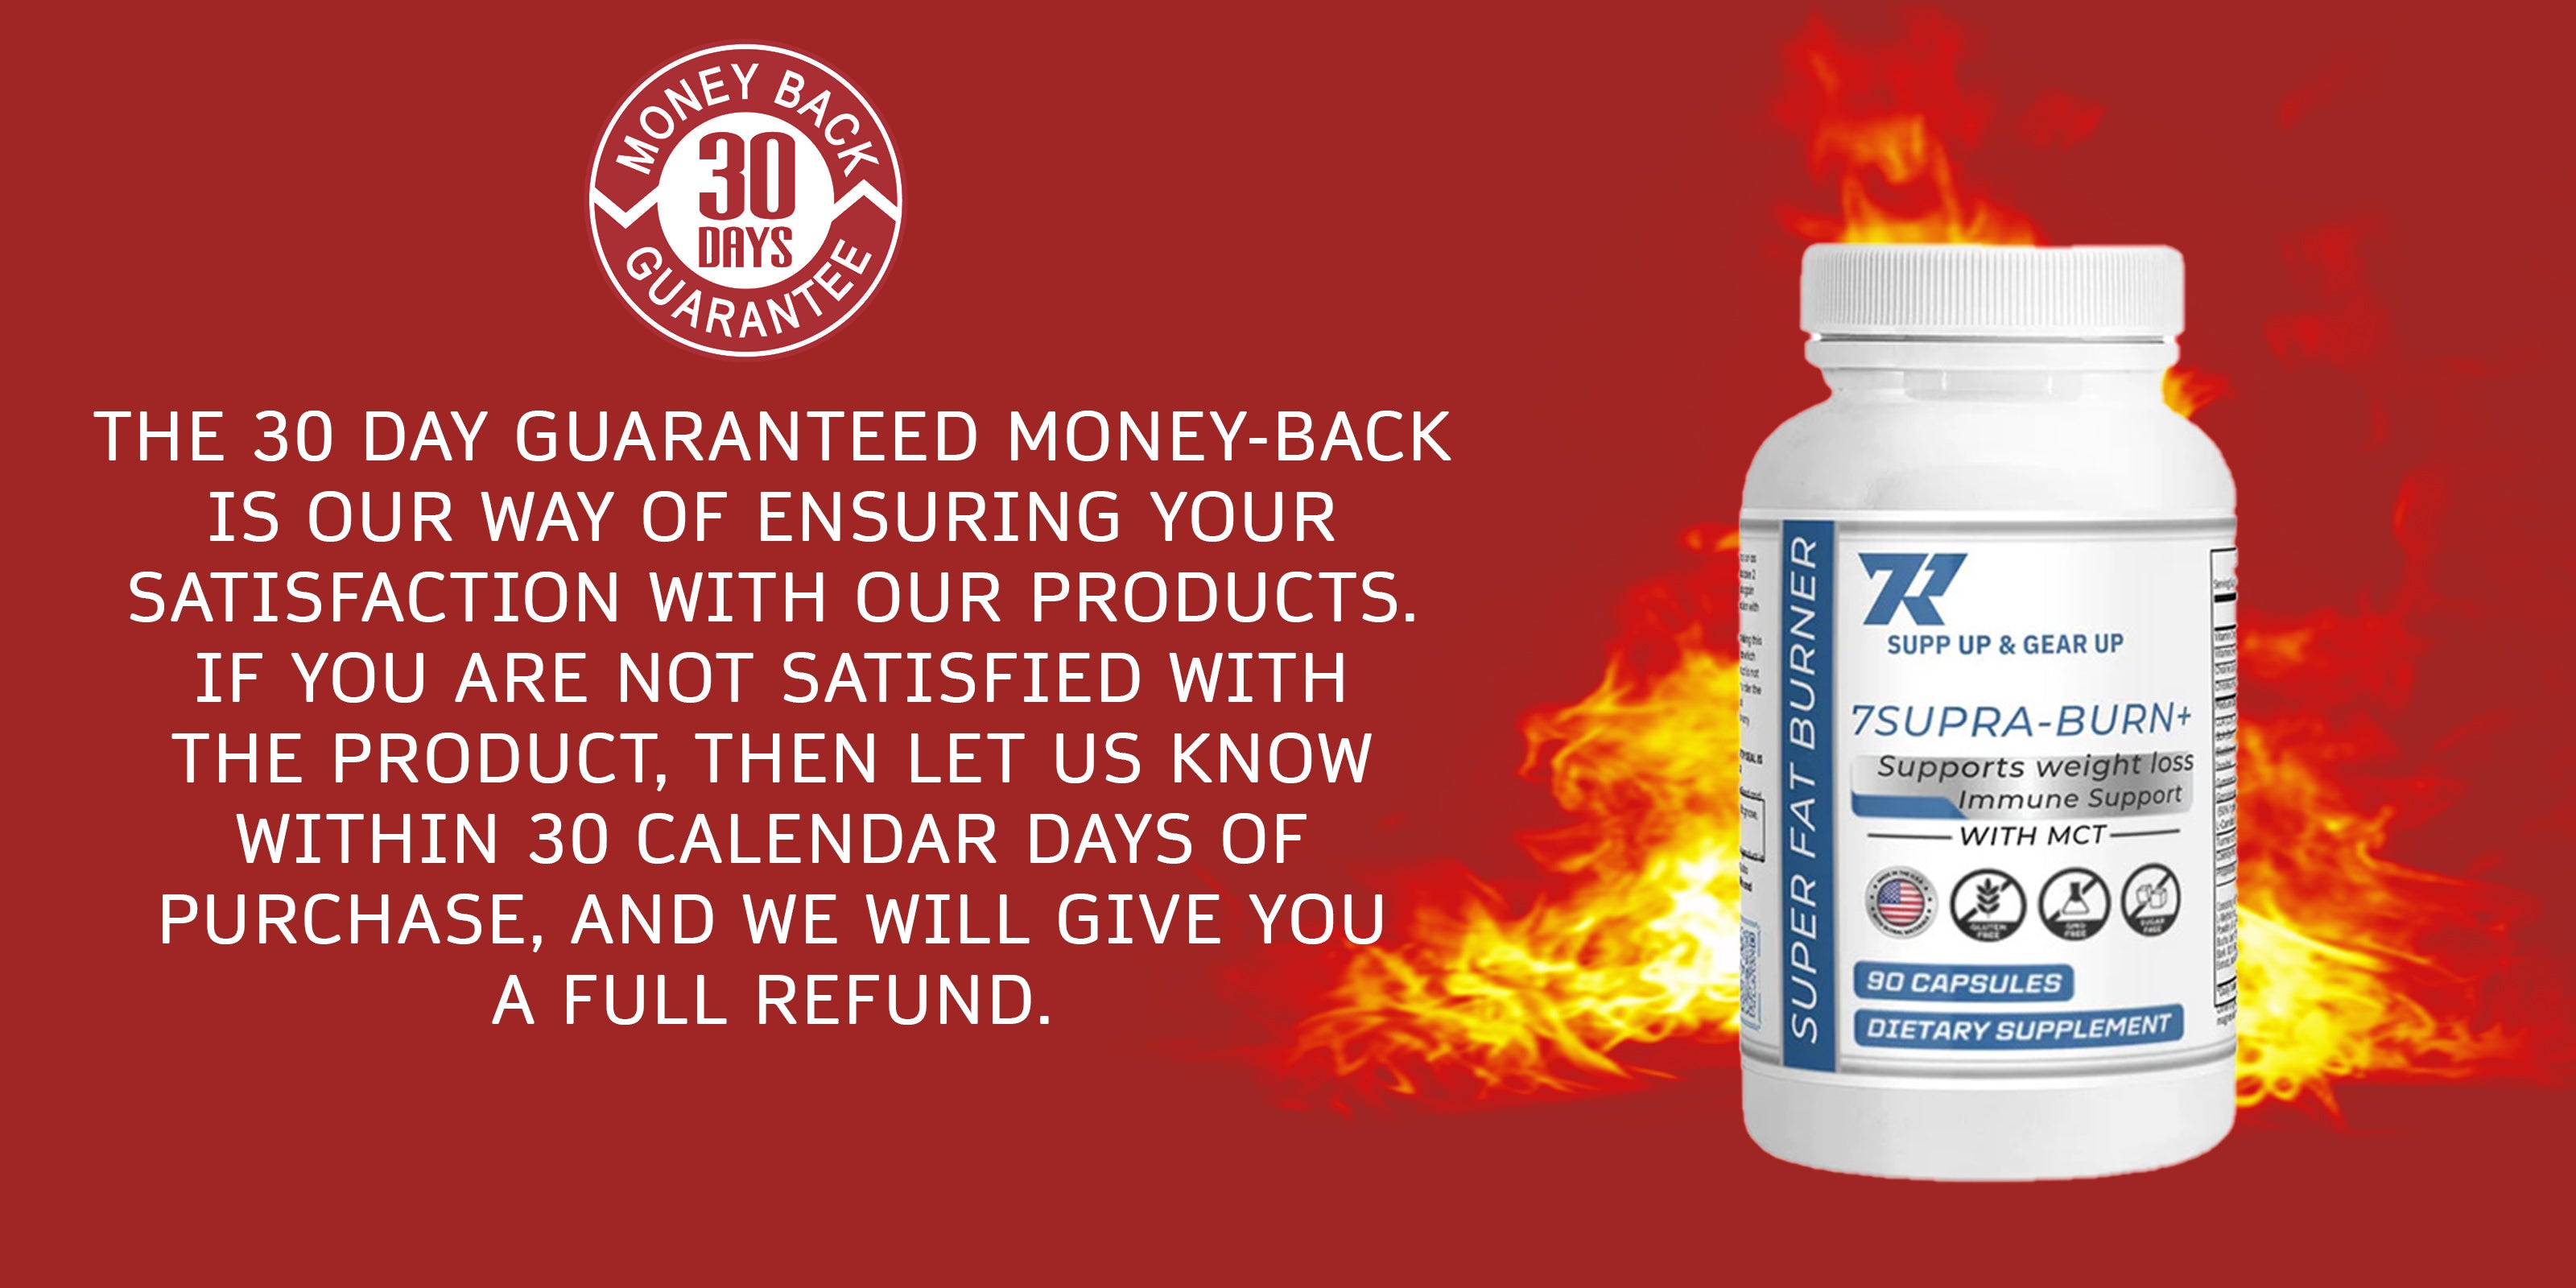 30 Days Return & Refund - try now 7ROSS supplements to burn fat and build muscle